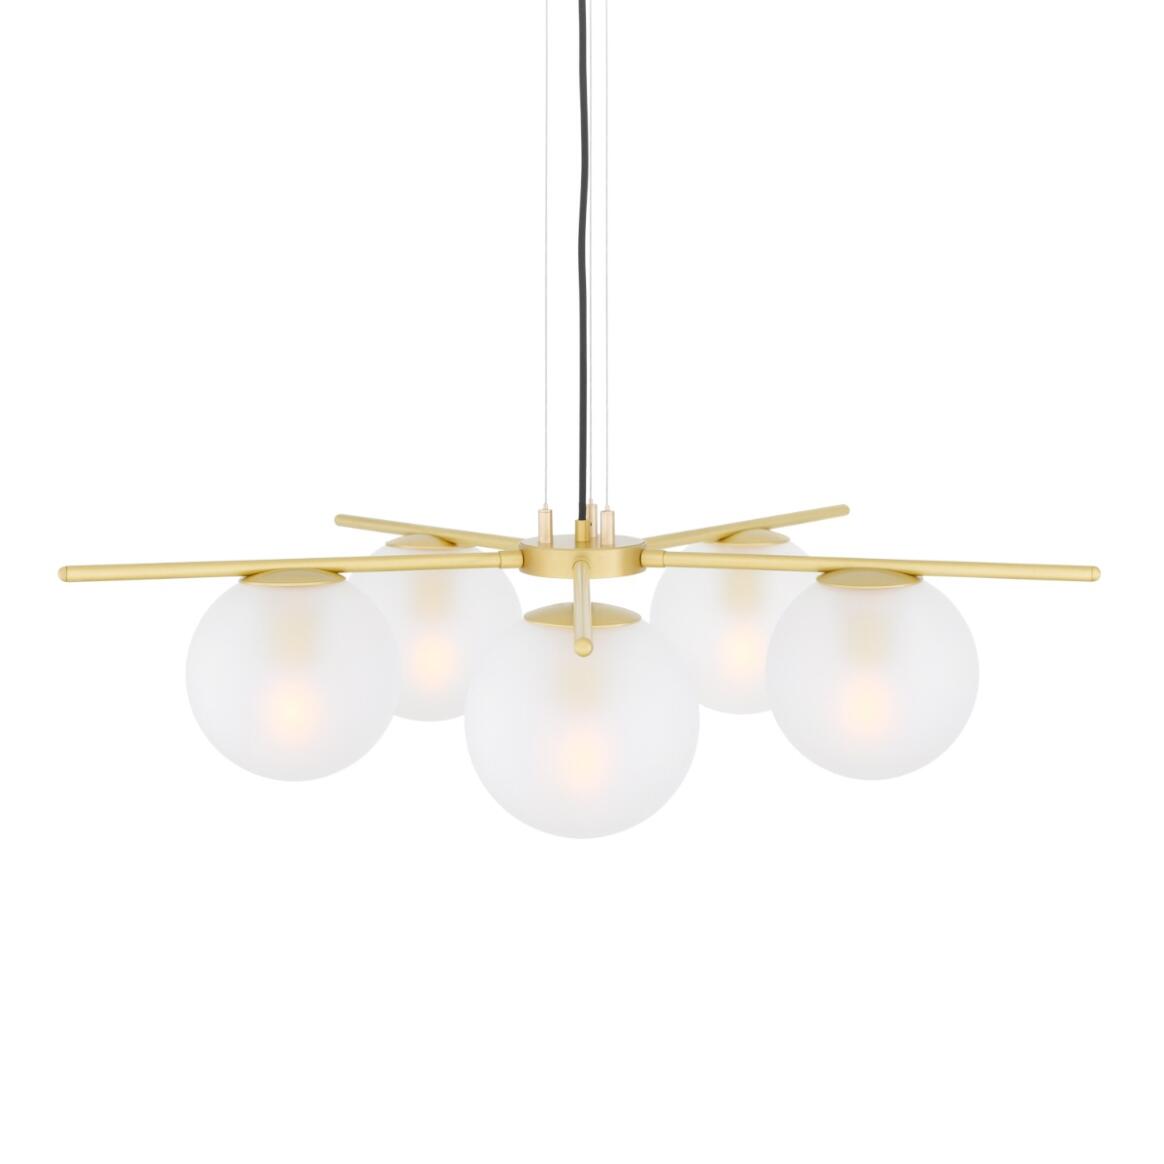 Madison Glass Ball Chandelier, Five-Arm main product image